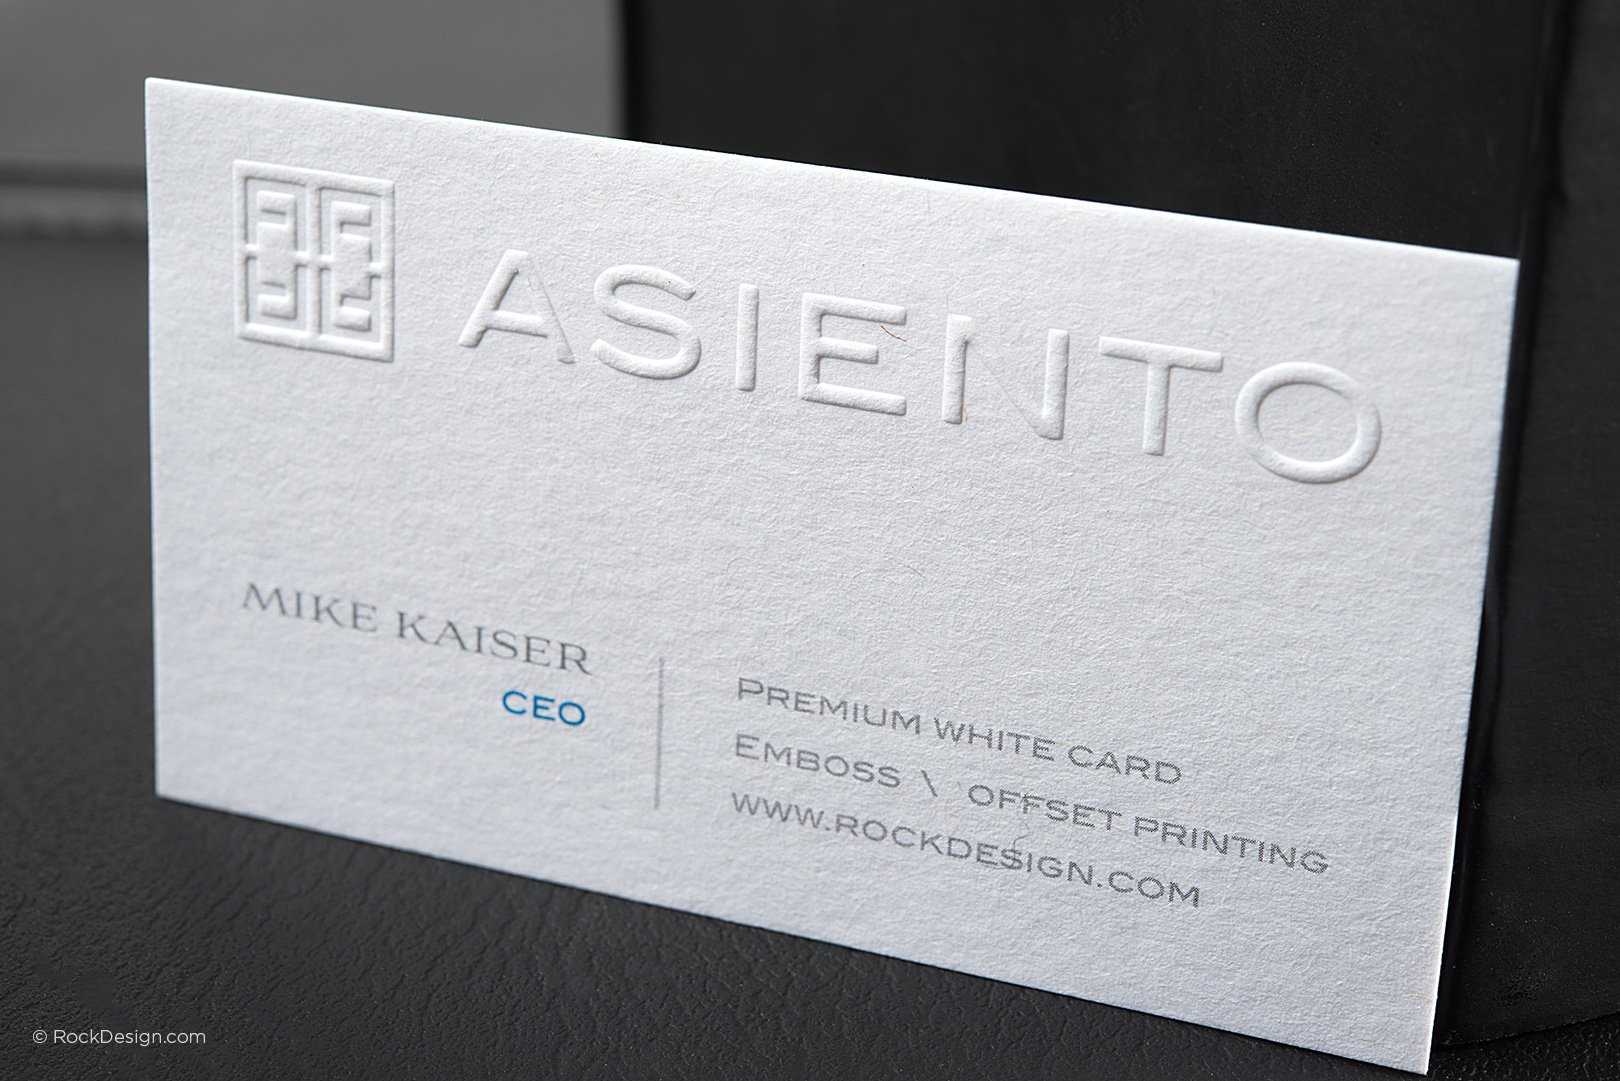 Embossed Design Free With Online Print Purchase | Rockdesign For Free Template Business Cards To Print